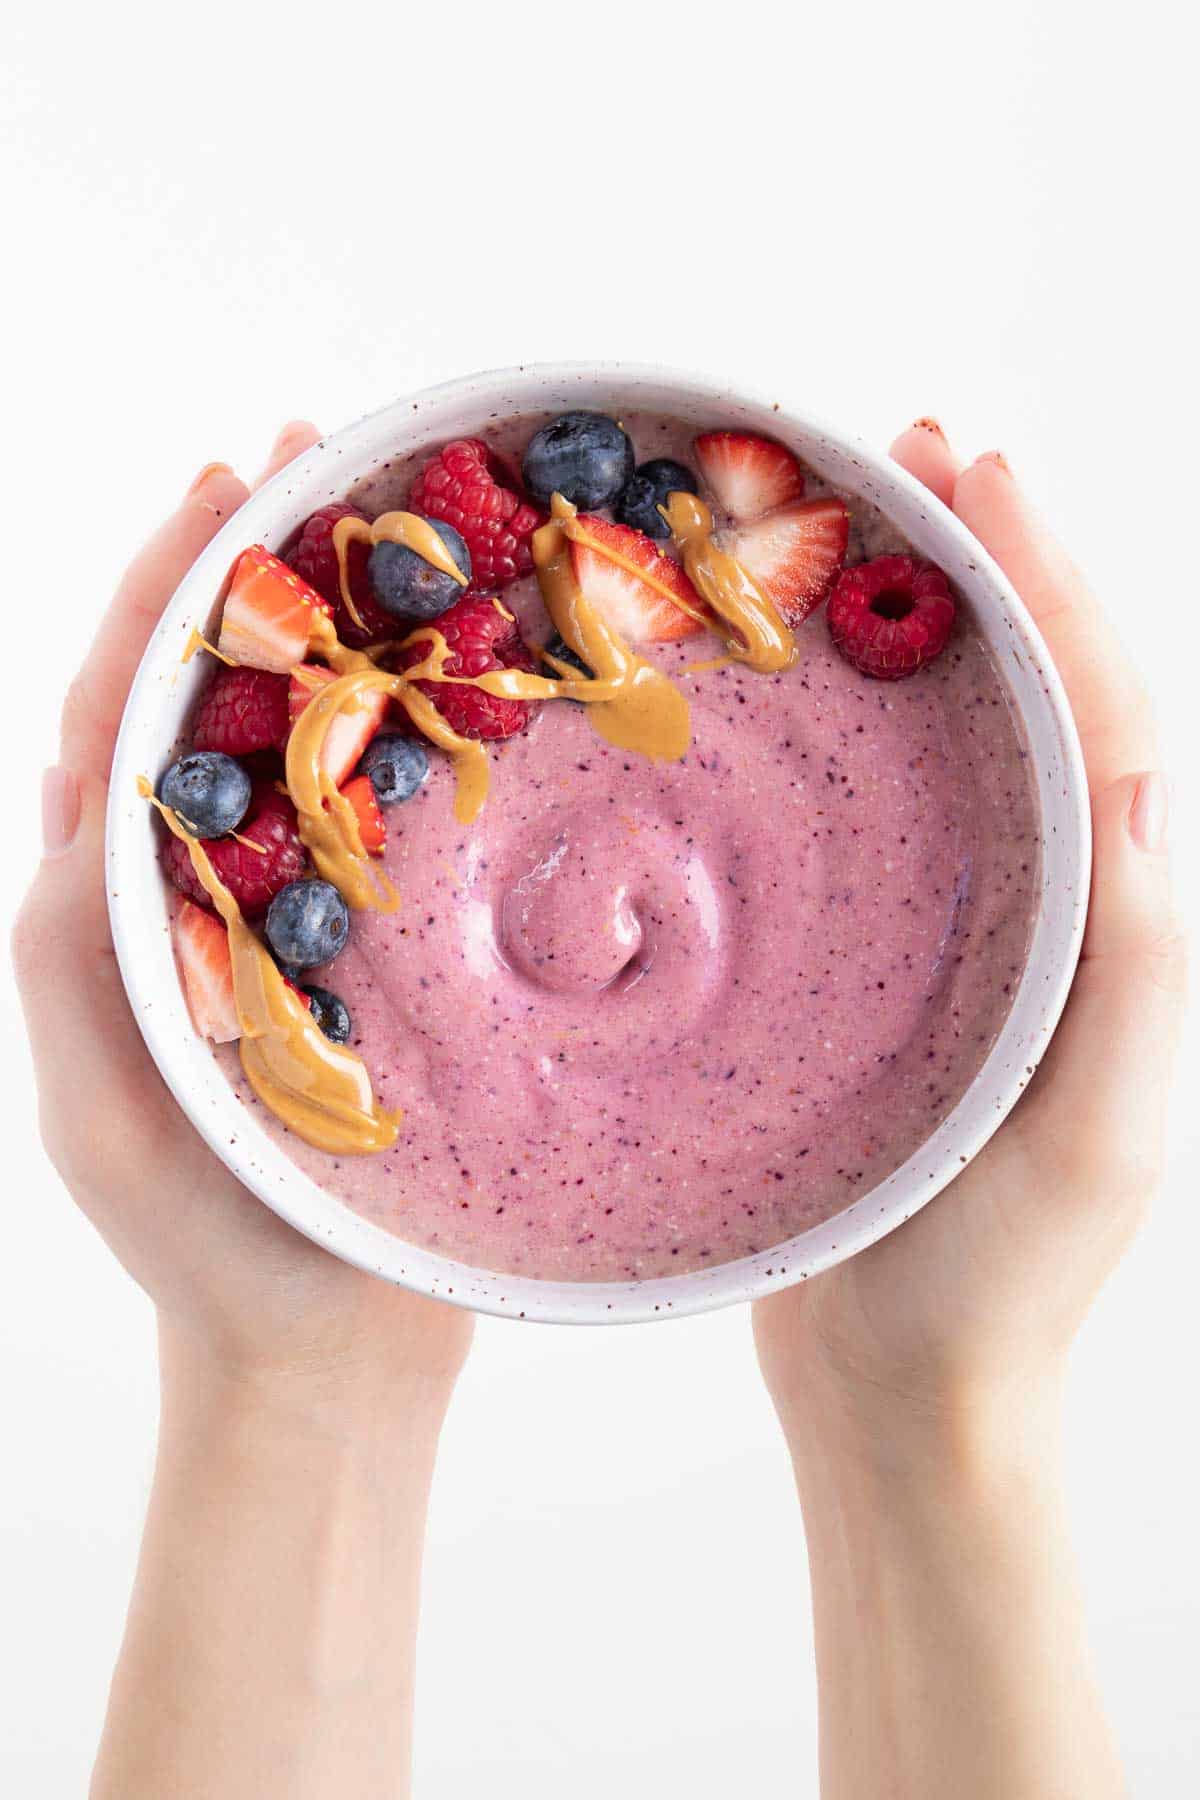 https://www.purelykaylie.com/wp-content/uploads/2020/01/Peanut-Butter-and-Jelly-Smoothie-Bowl-10.jpg